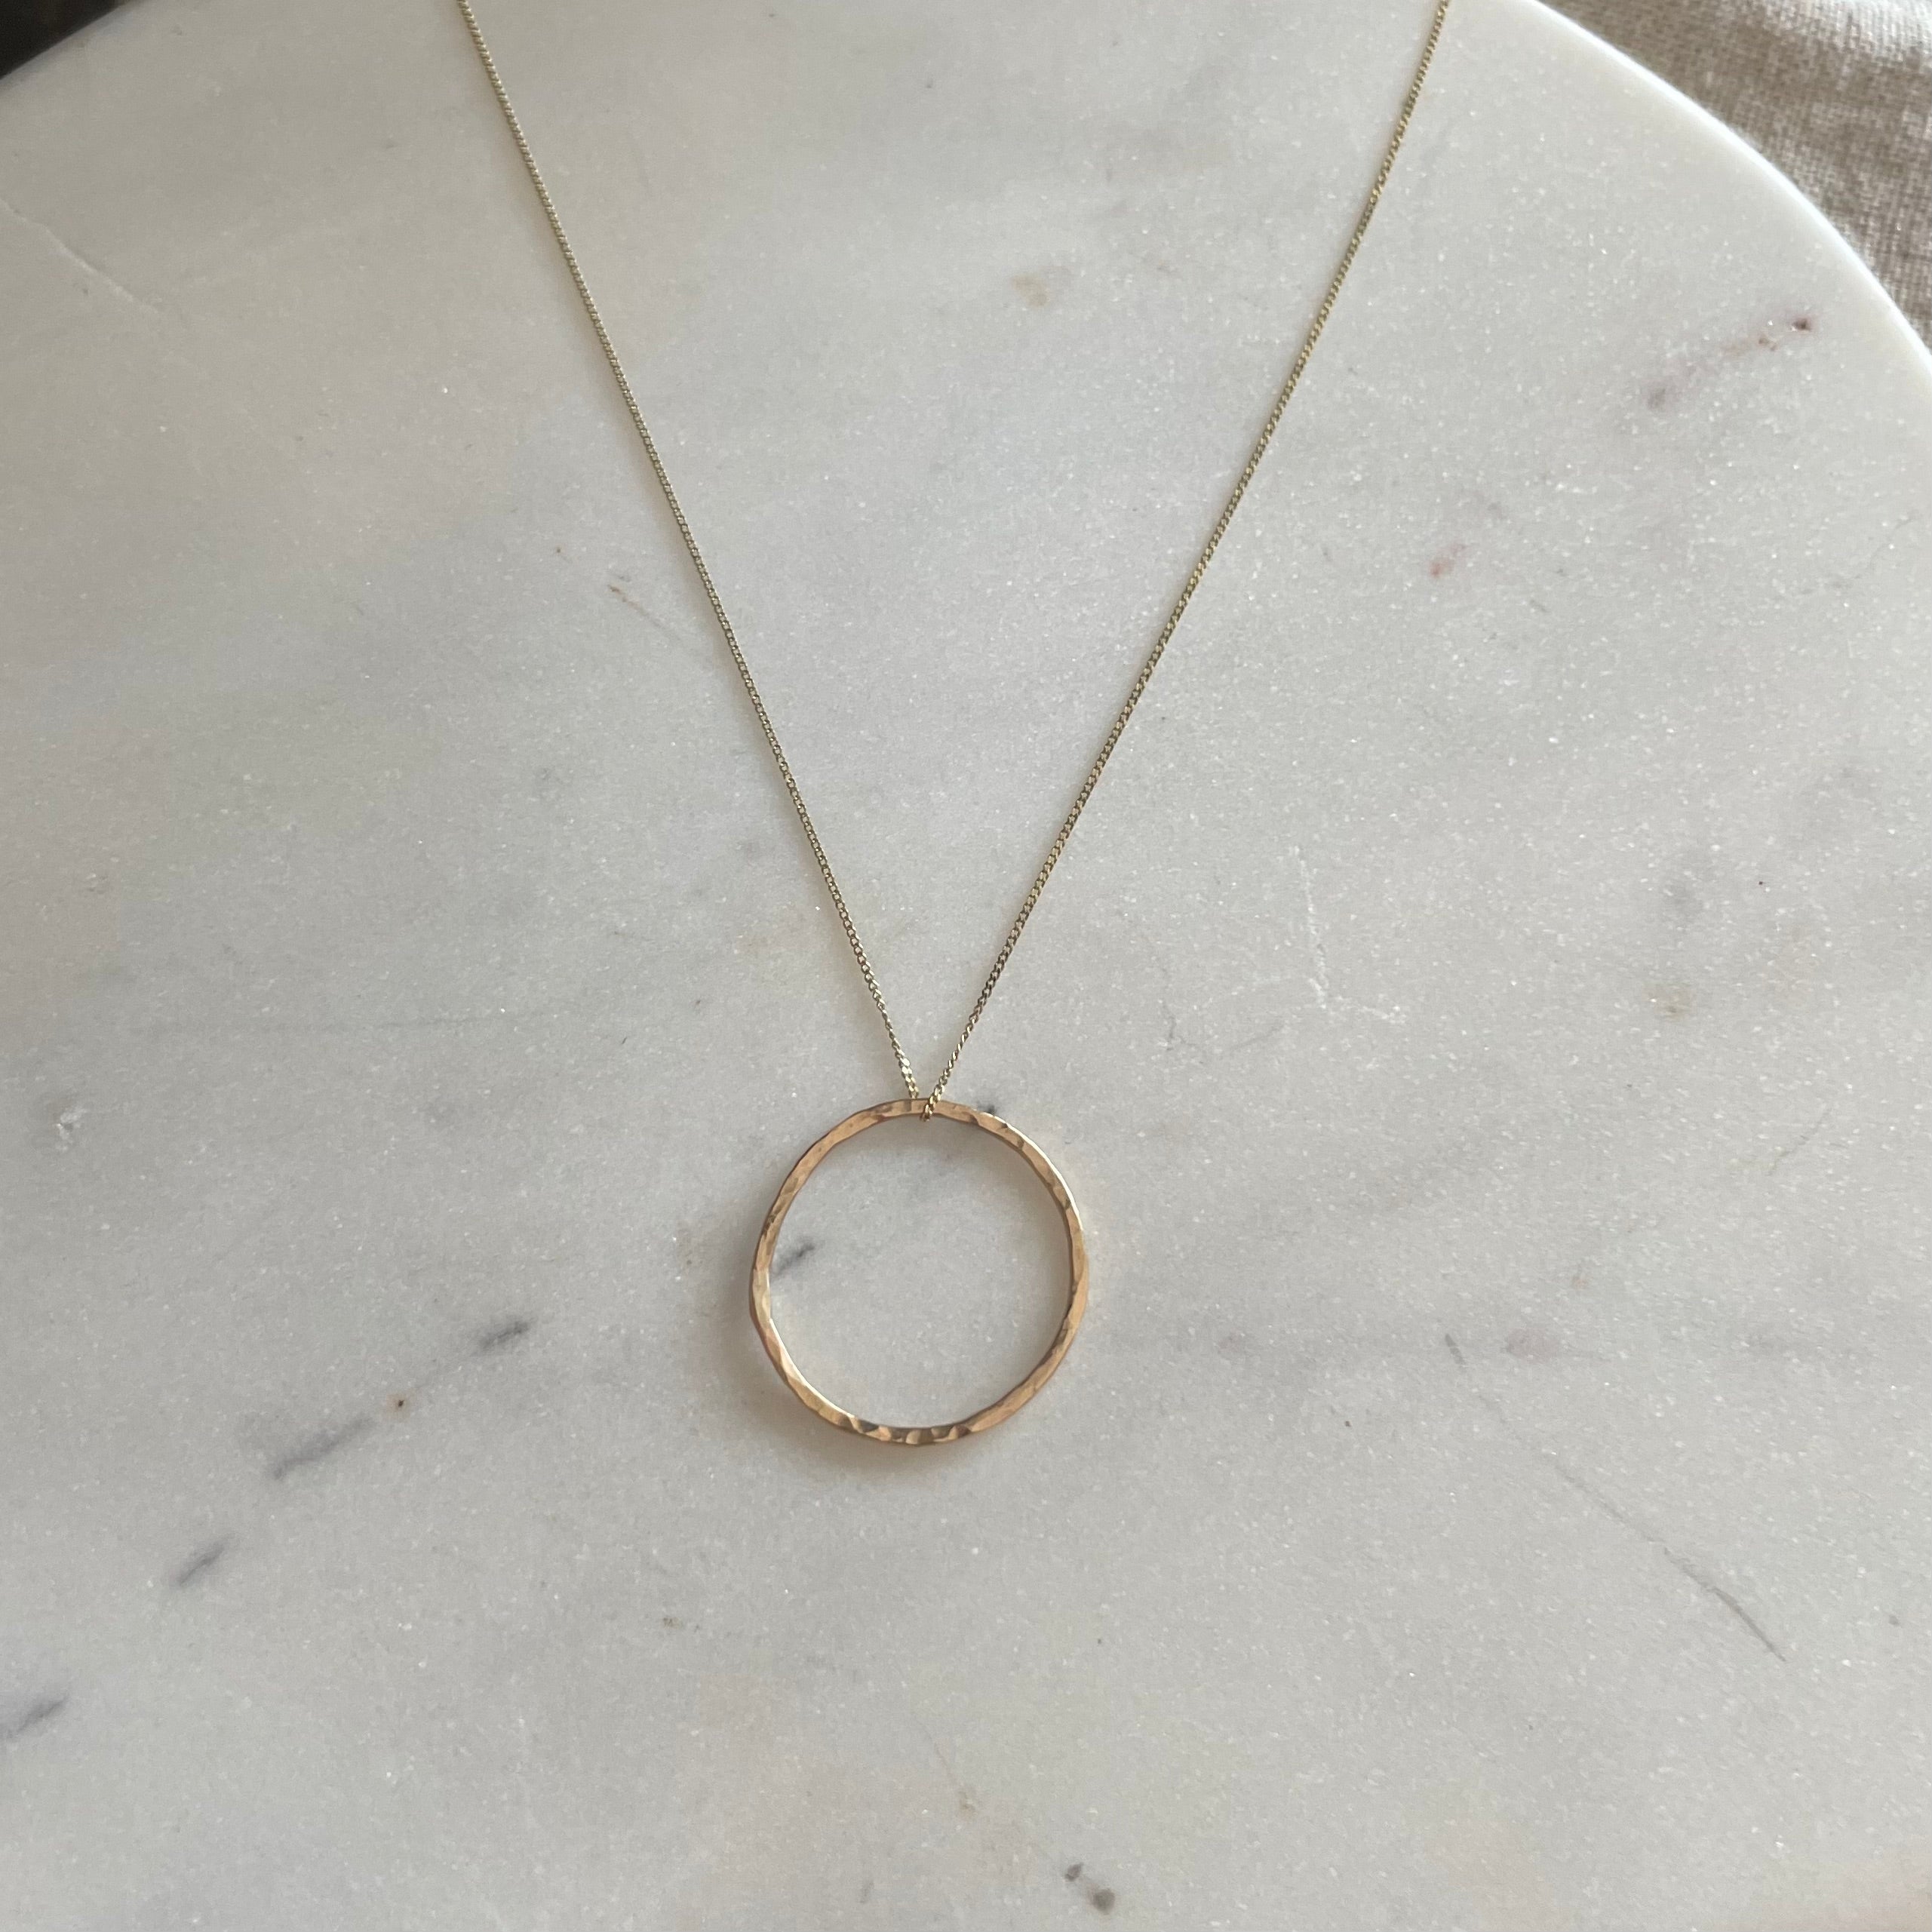 Gold eternity circle - 9 ct hammered on 45cm gold chain